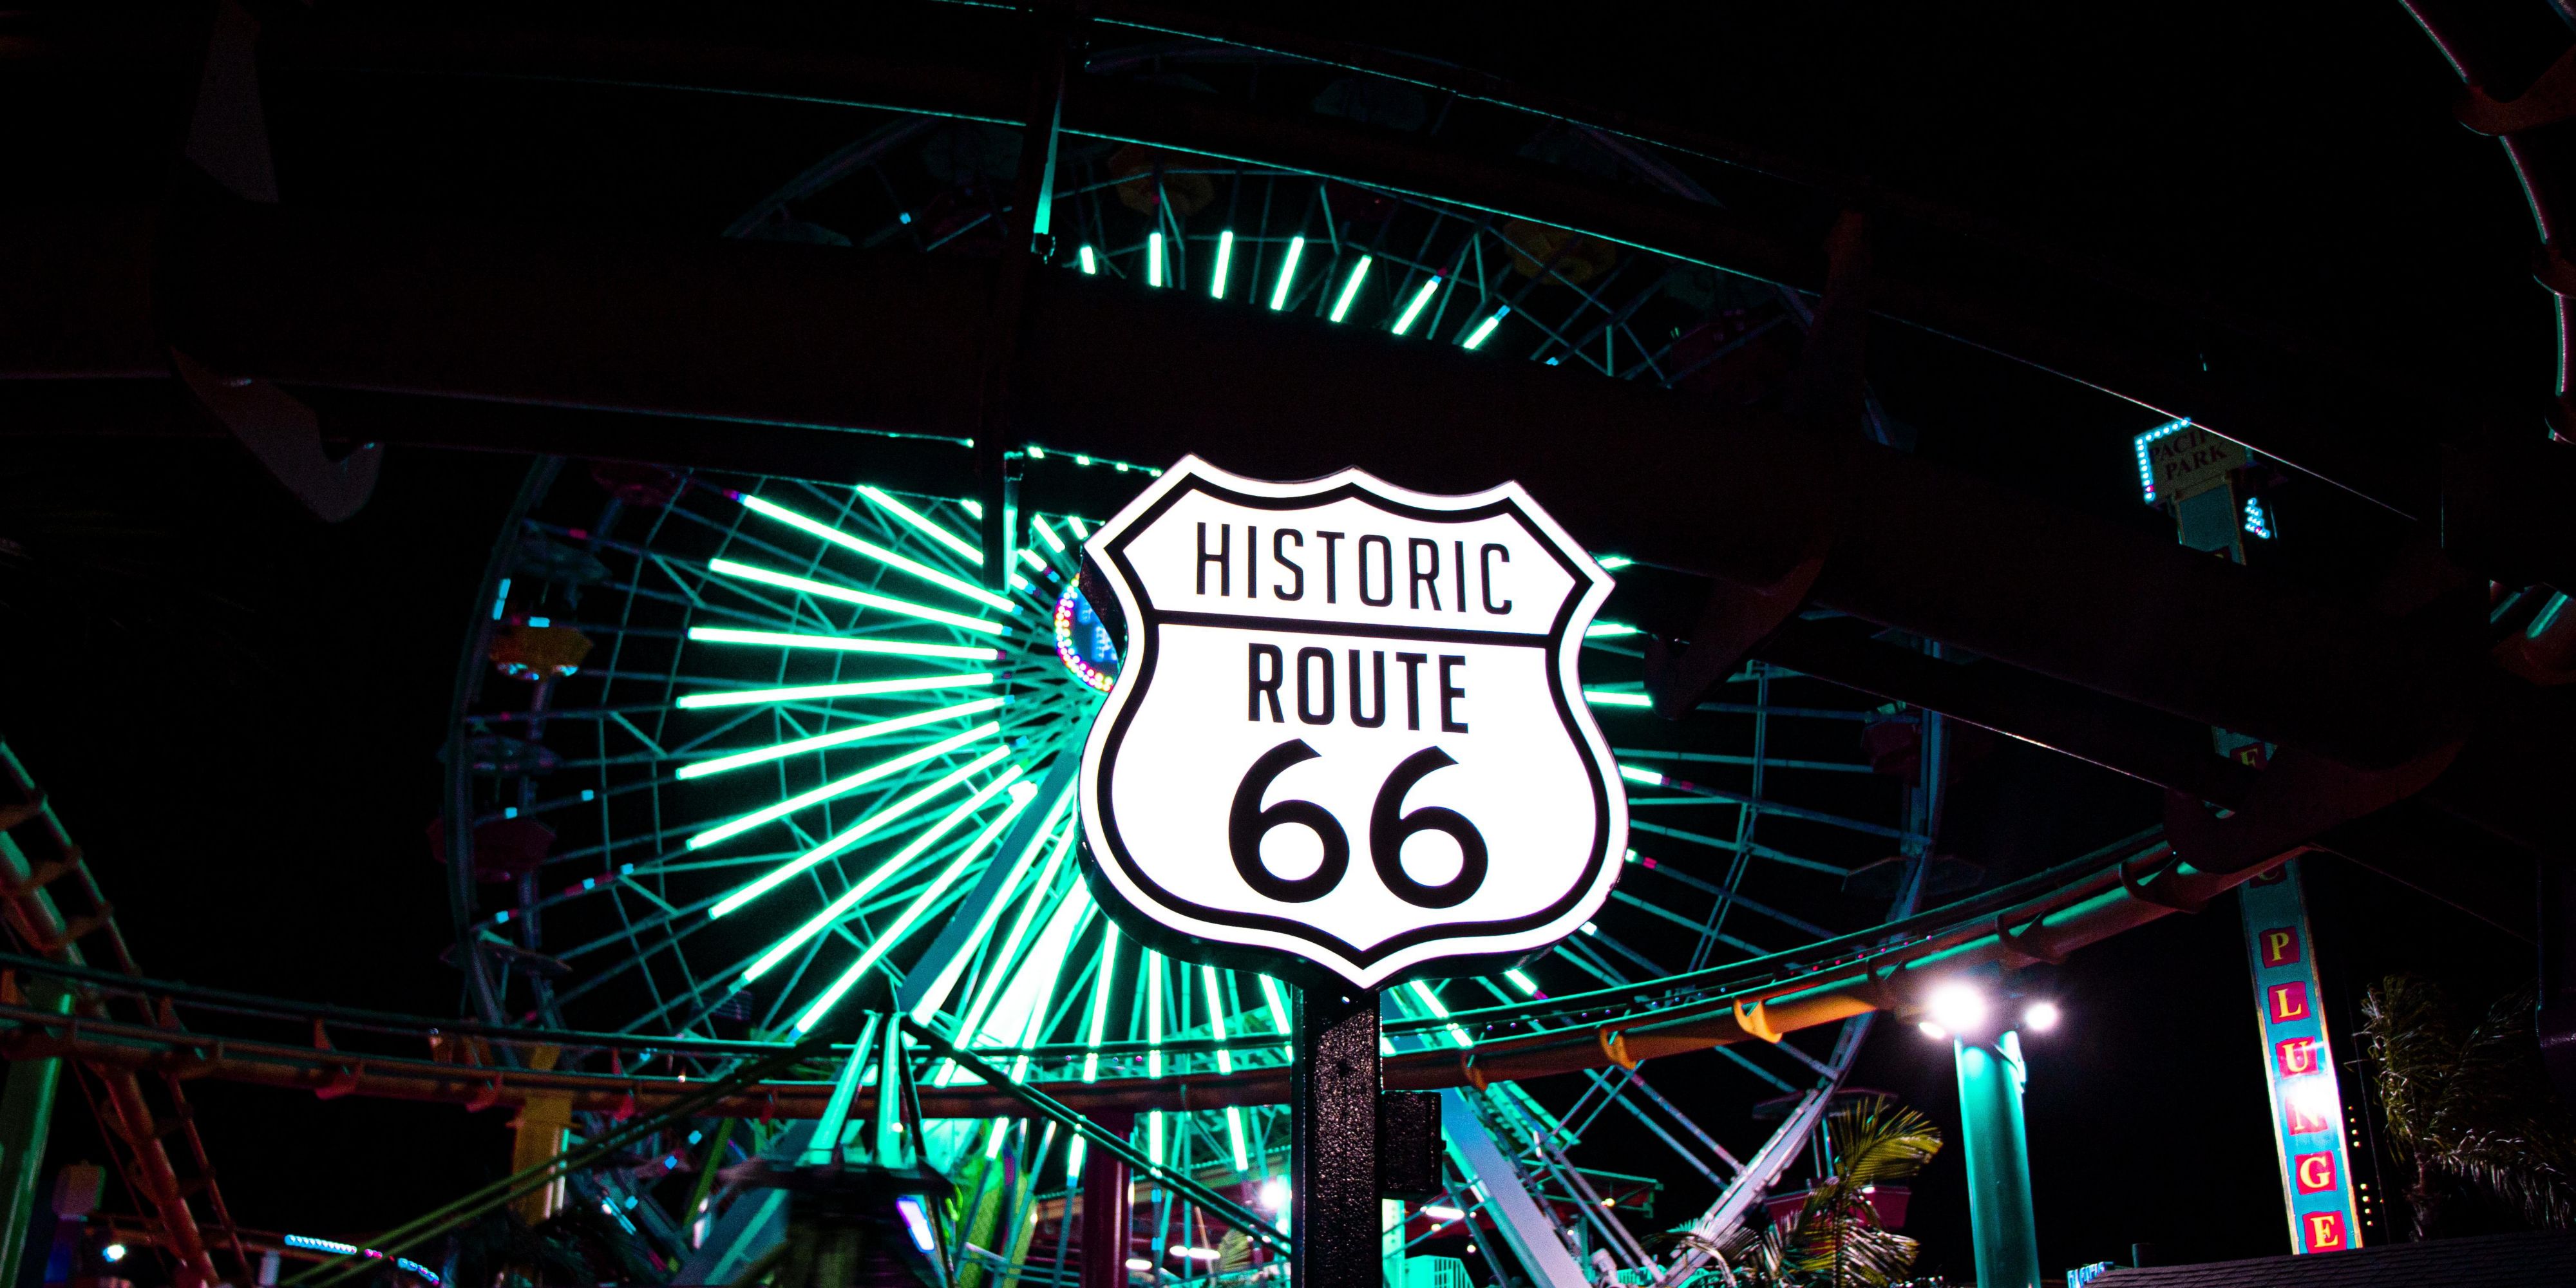 Traveling down historic route 66? We are a great stopping point during your journey across the US. Relax for a night with us so you can continue your journey refreshed. 